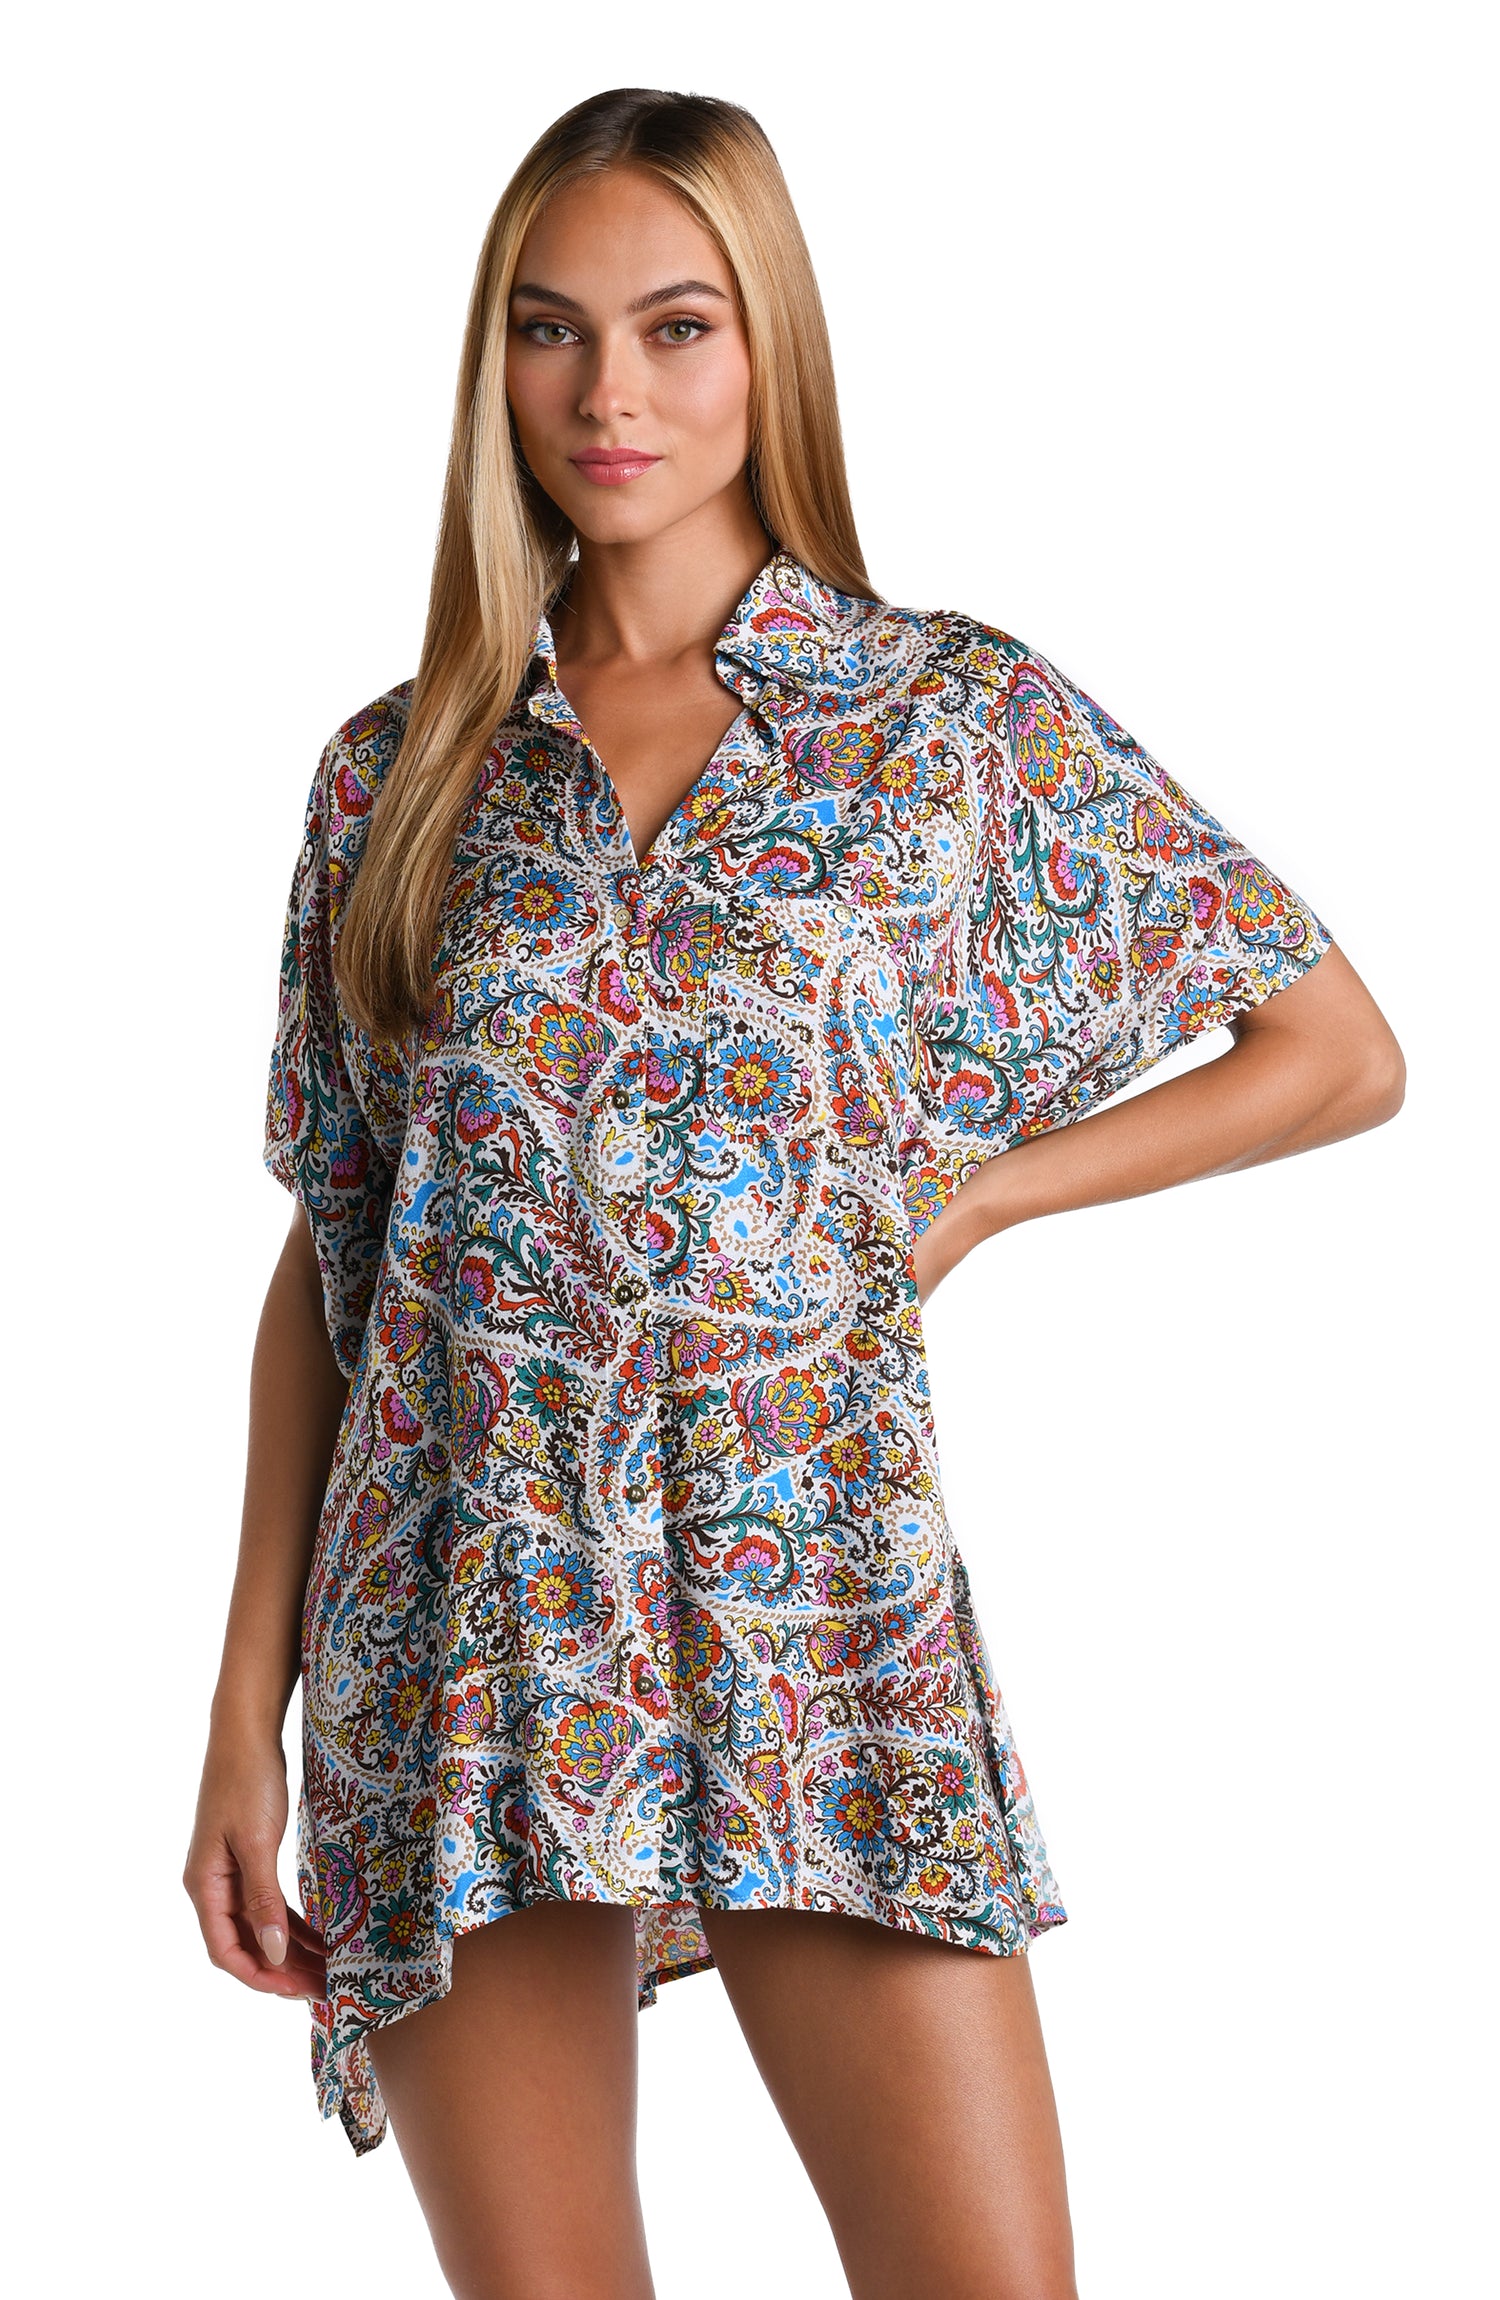 Model is wearing a white, red, blue, green, and yellow multicolored paisley printed Resort Shirt Cover Up